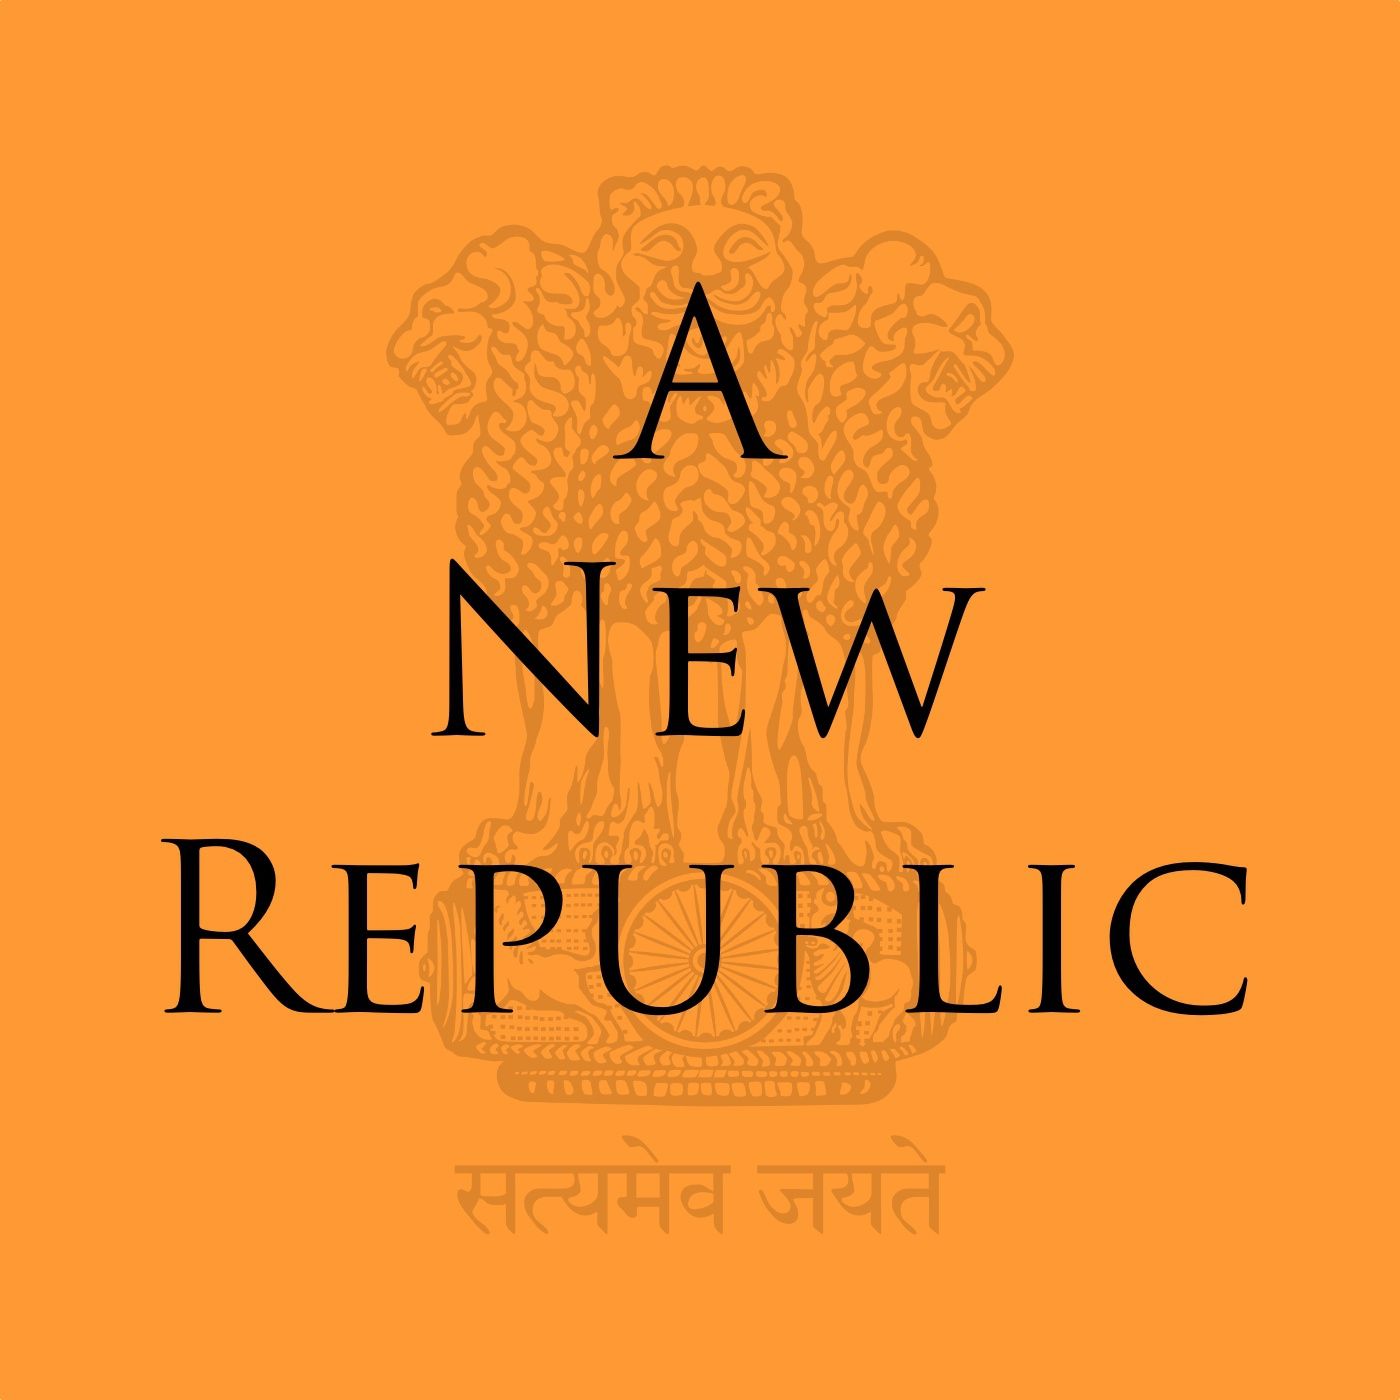 A New Republic - Episode 7: A colony betrayed